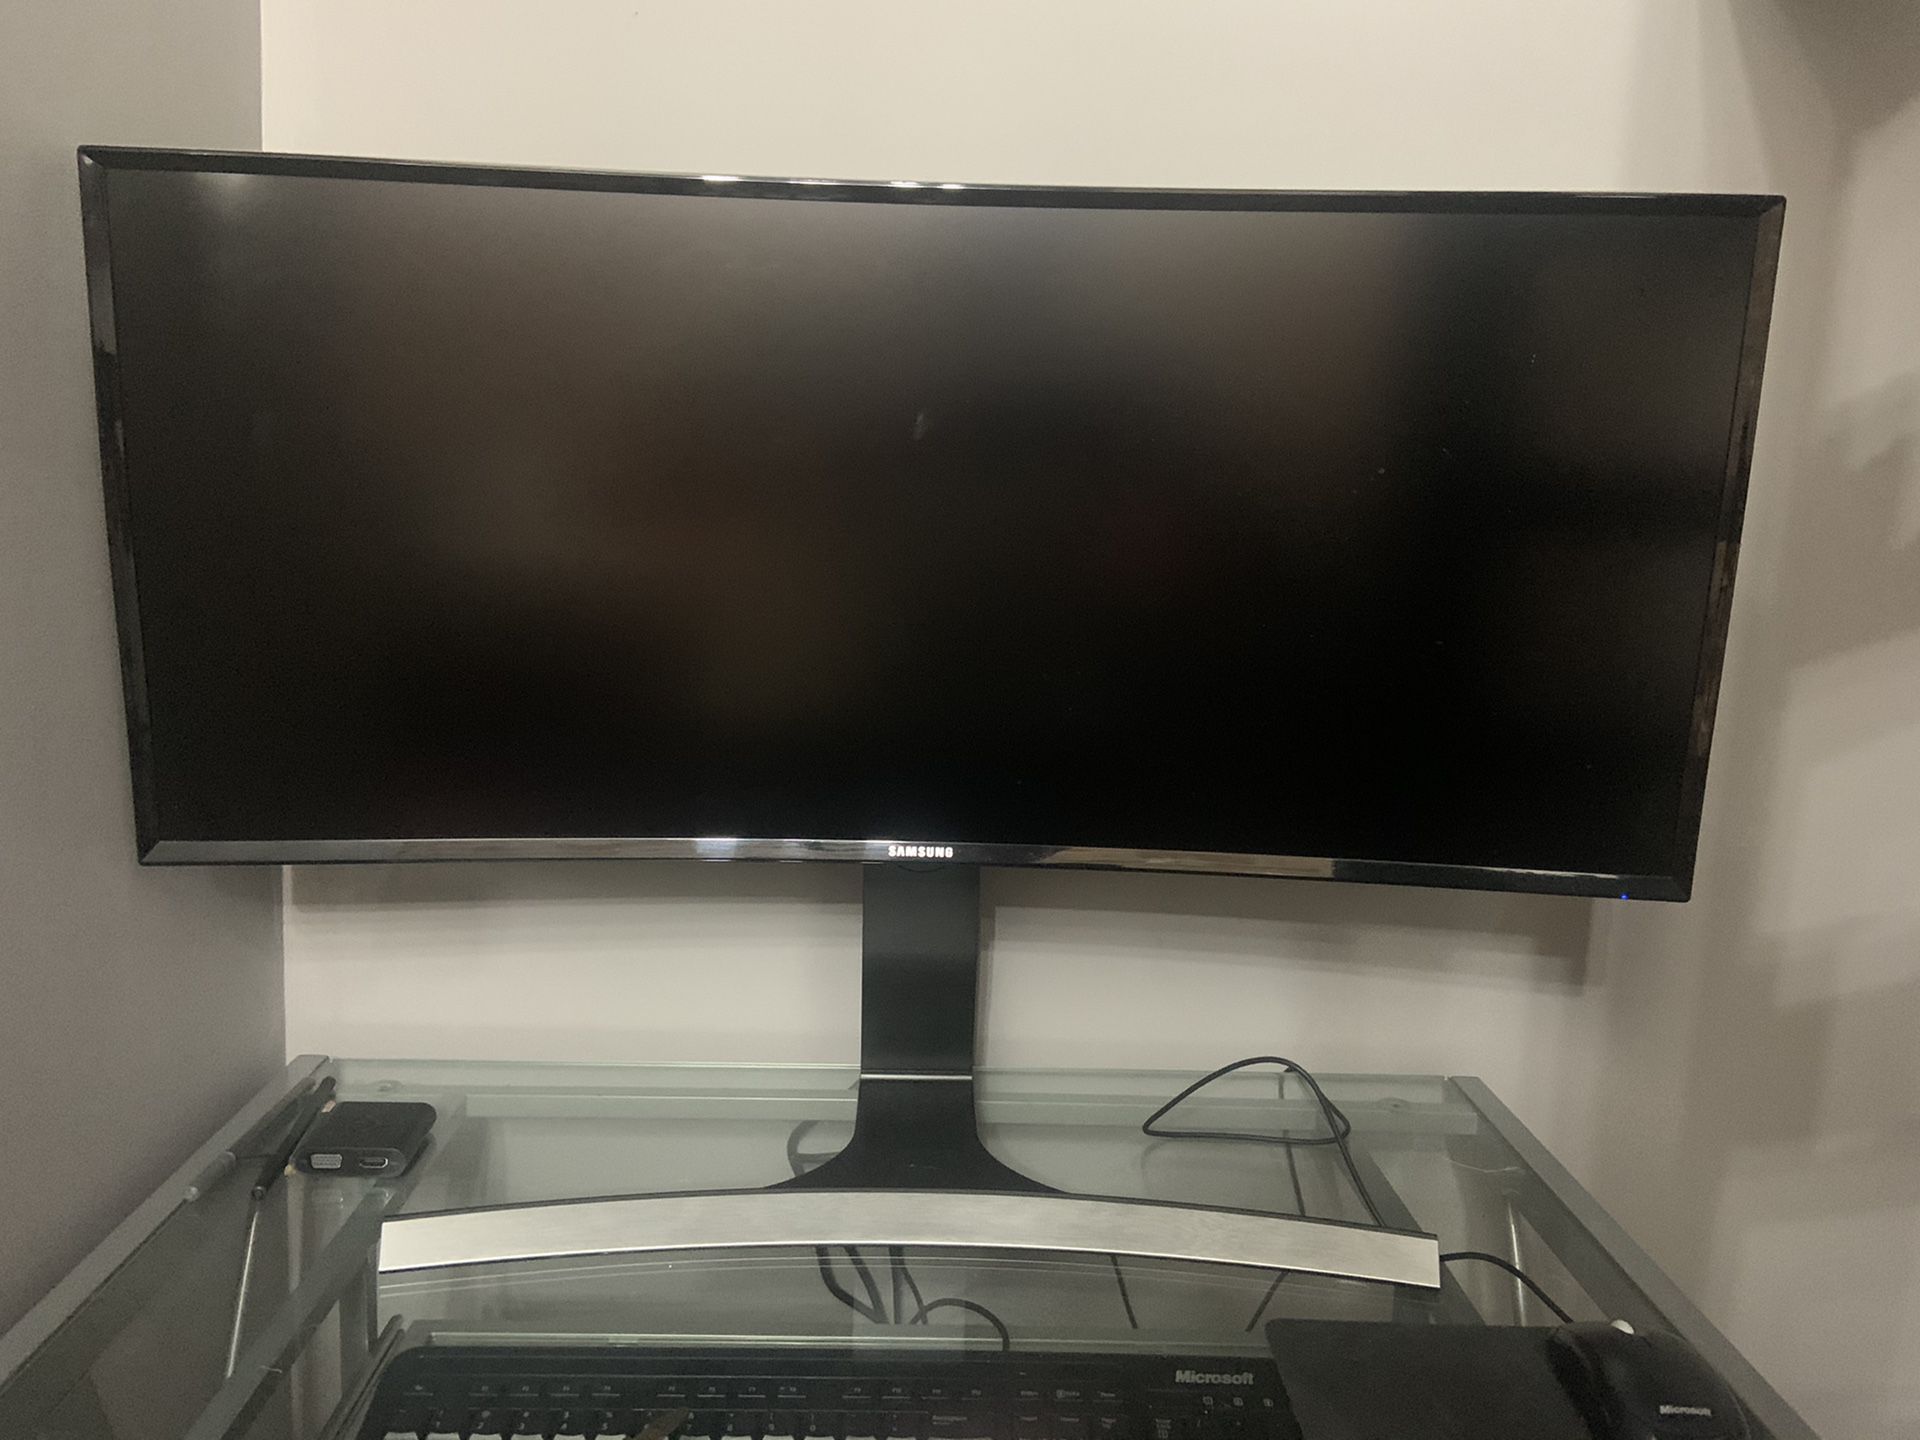 Samsung 34” Curved Monitor